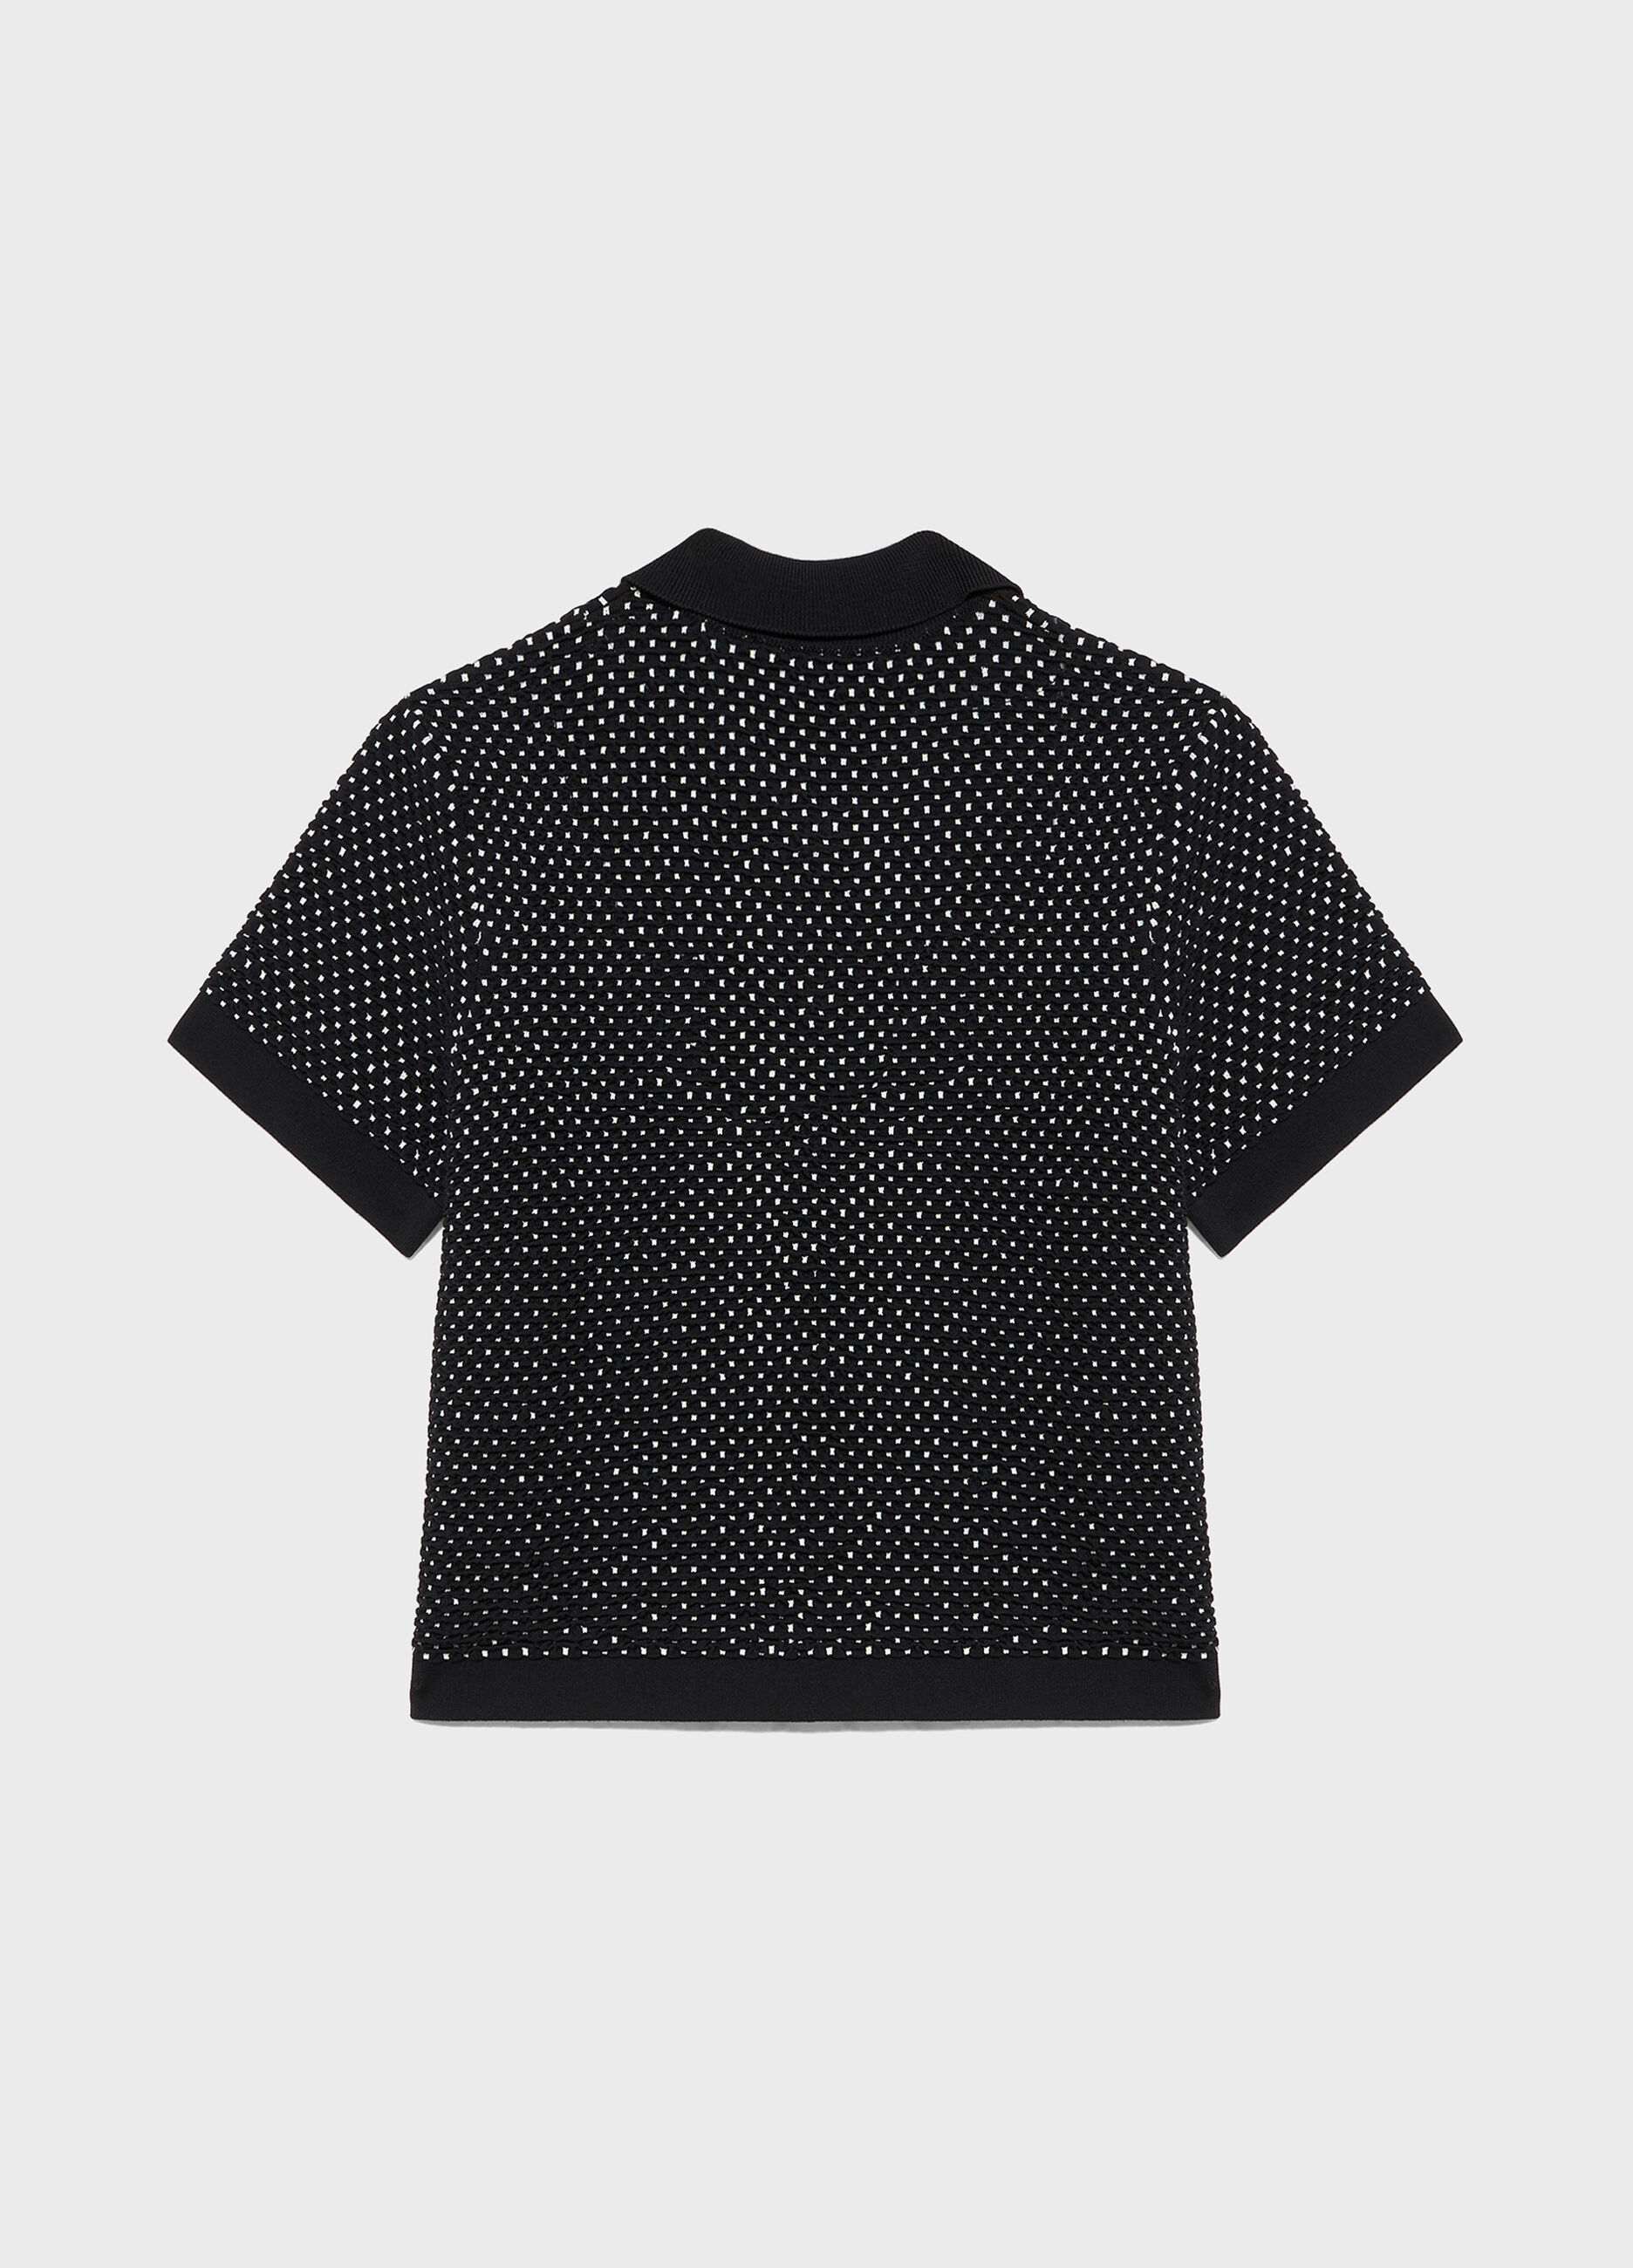 Jacquard knit tricot t-shirt with short sleeves